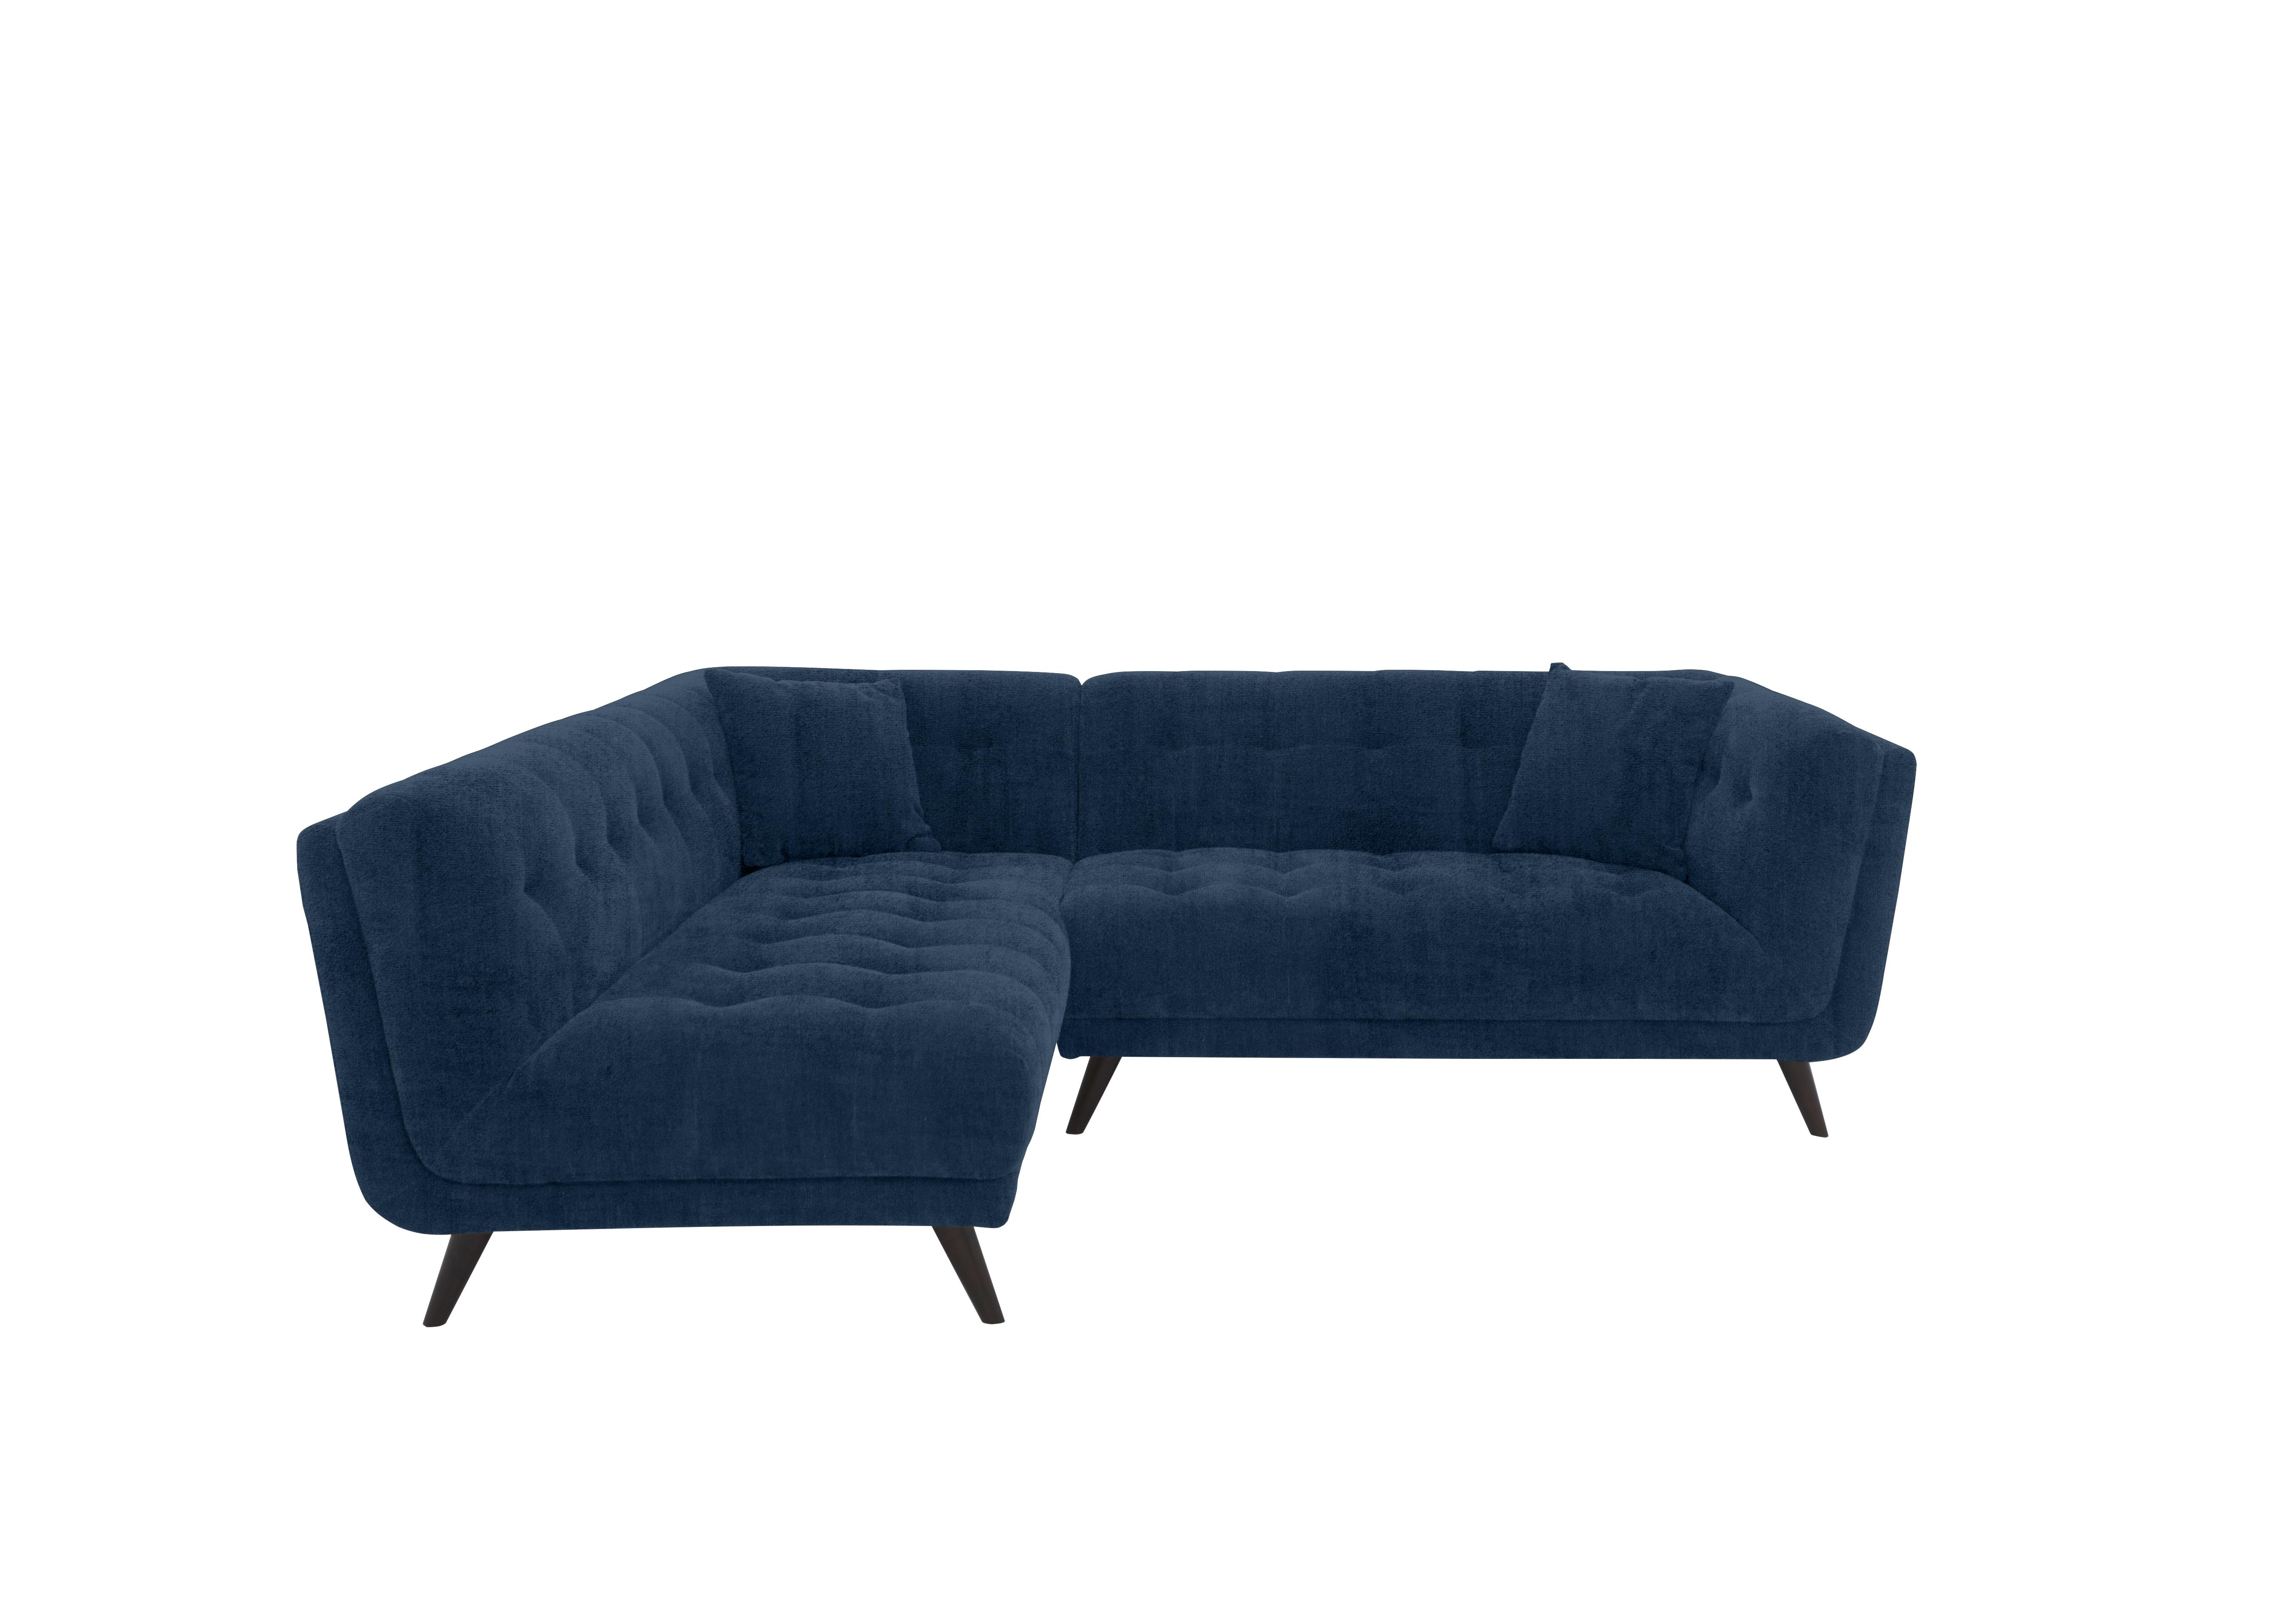 Rene Fabric Chaise End Corner Sofa in Heritage 52000 Airforce Es Ft on Furniture Village